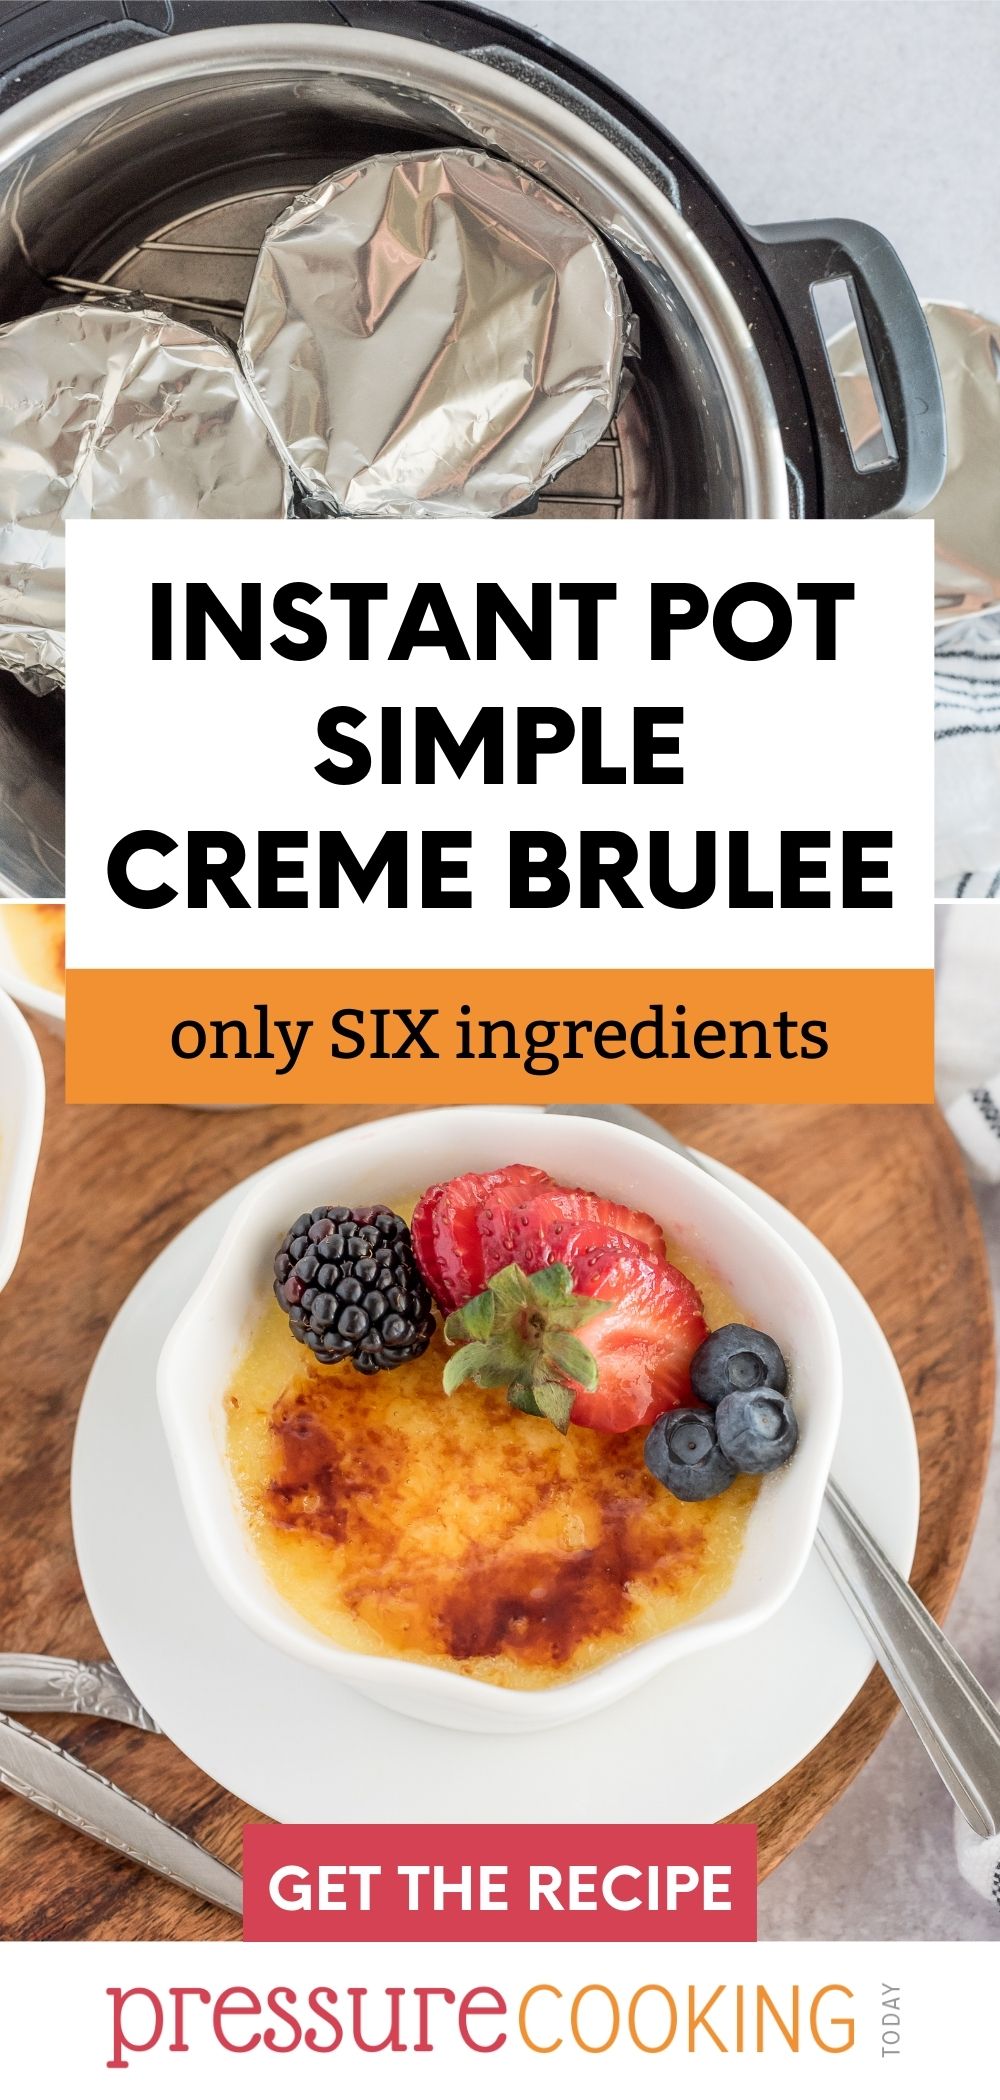 Pinterest button reading "Instant Pot Simple Creme Brulee: only SIX ingredients" over two pictures: the top with an Instant Pot and foil wrapped ramekins, and the bottom with a browned sugar crust and blueberries and sliced strawberries via @PressureCook2da